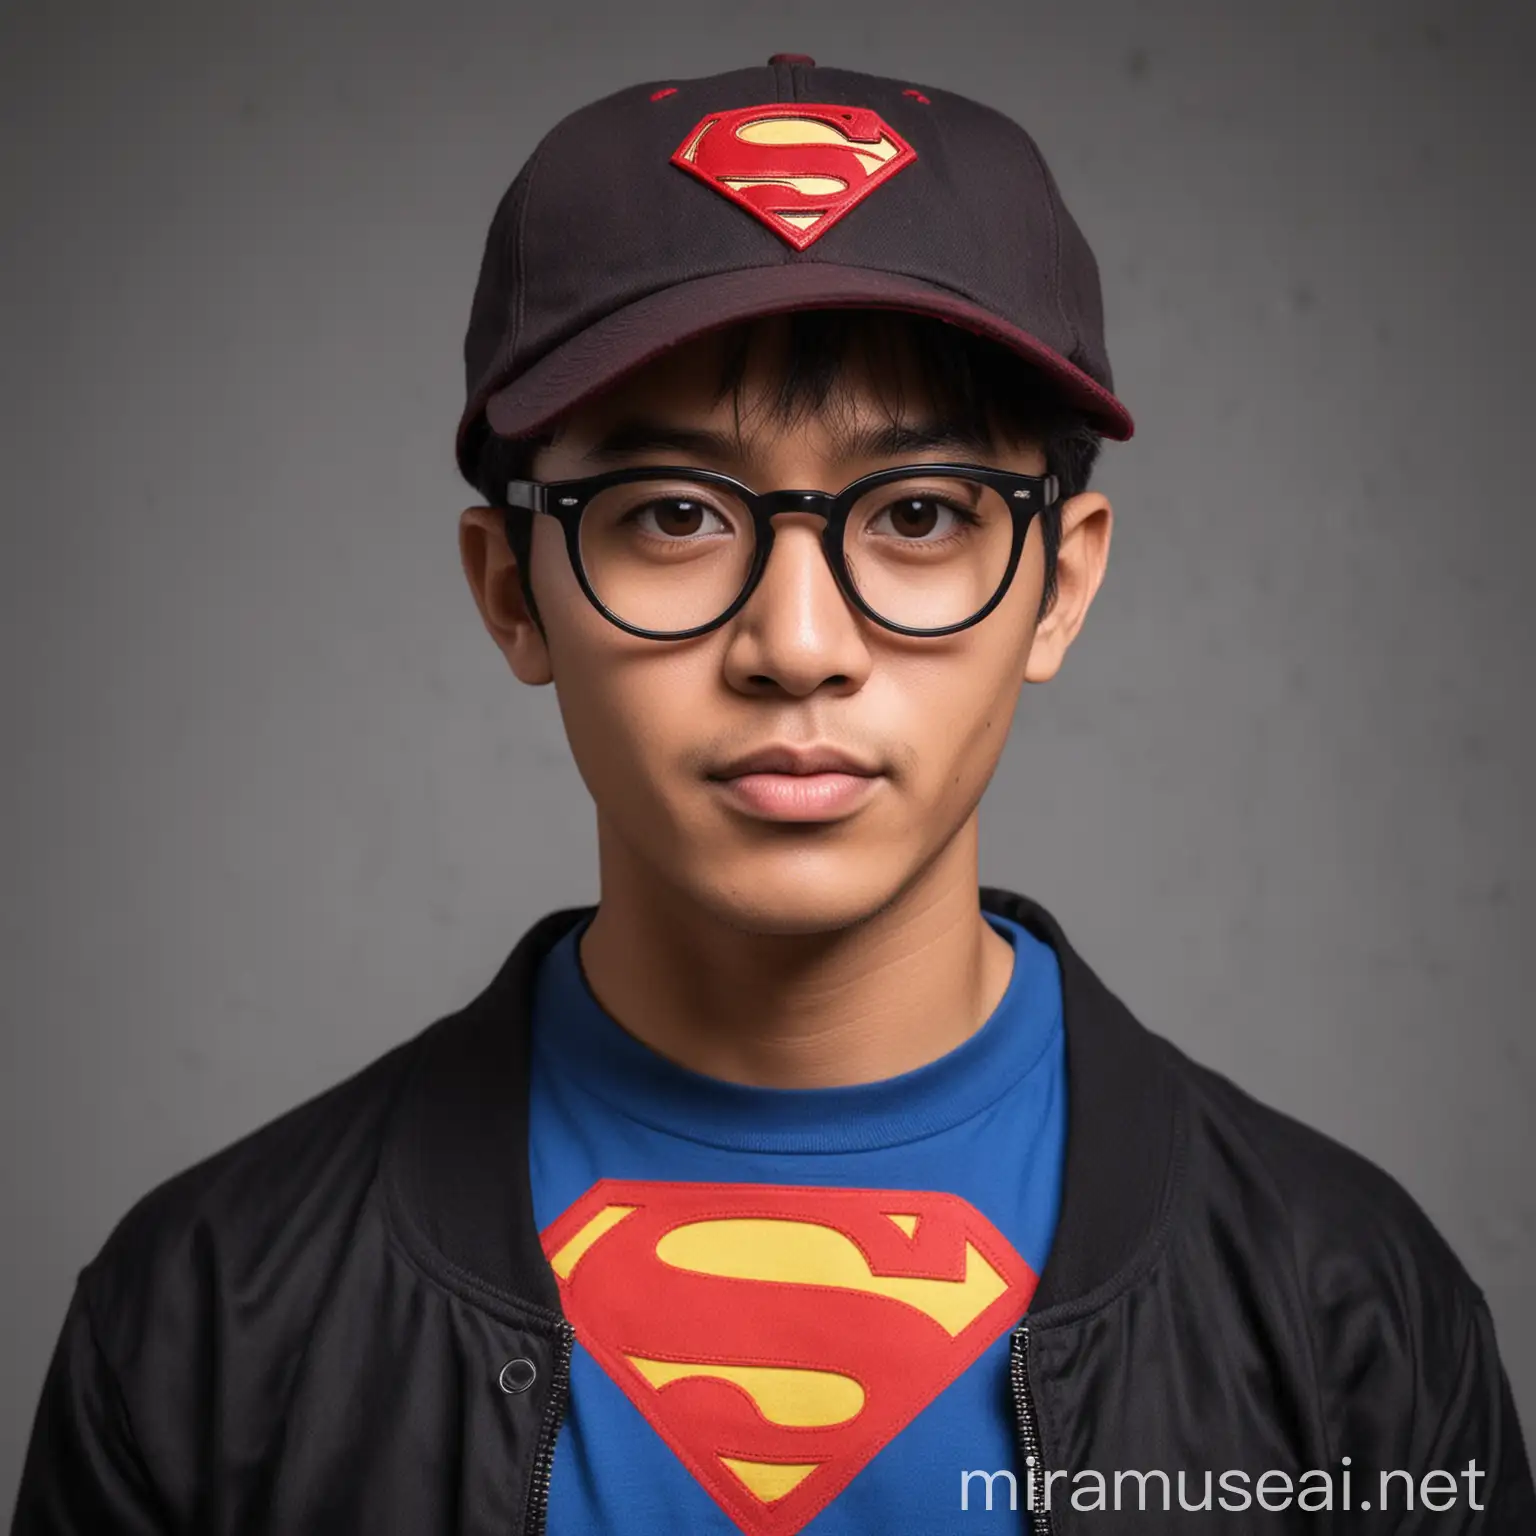 25 years old Indonesian man wearing dark grey and red baseball cap with superman logo - short hair - round face - black frame glasses - blue t-shirt and black jacket